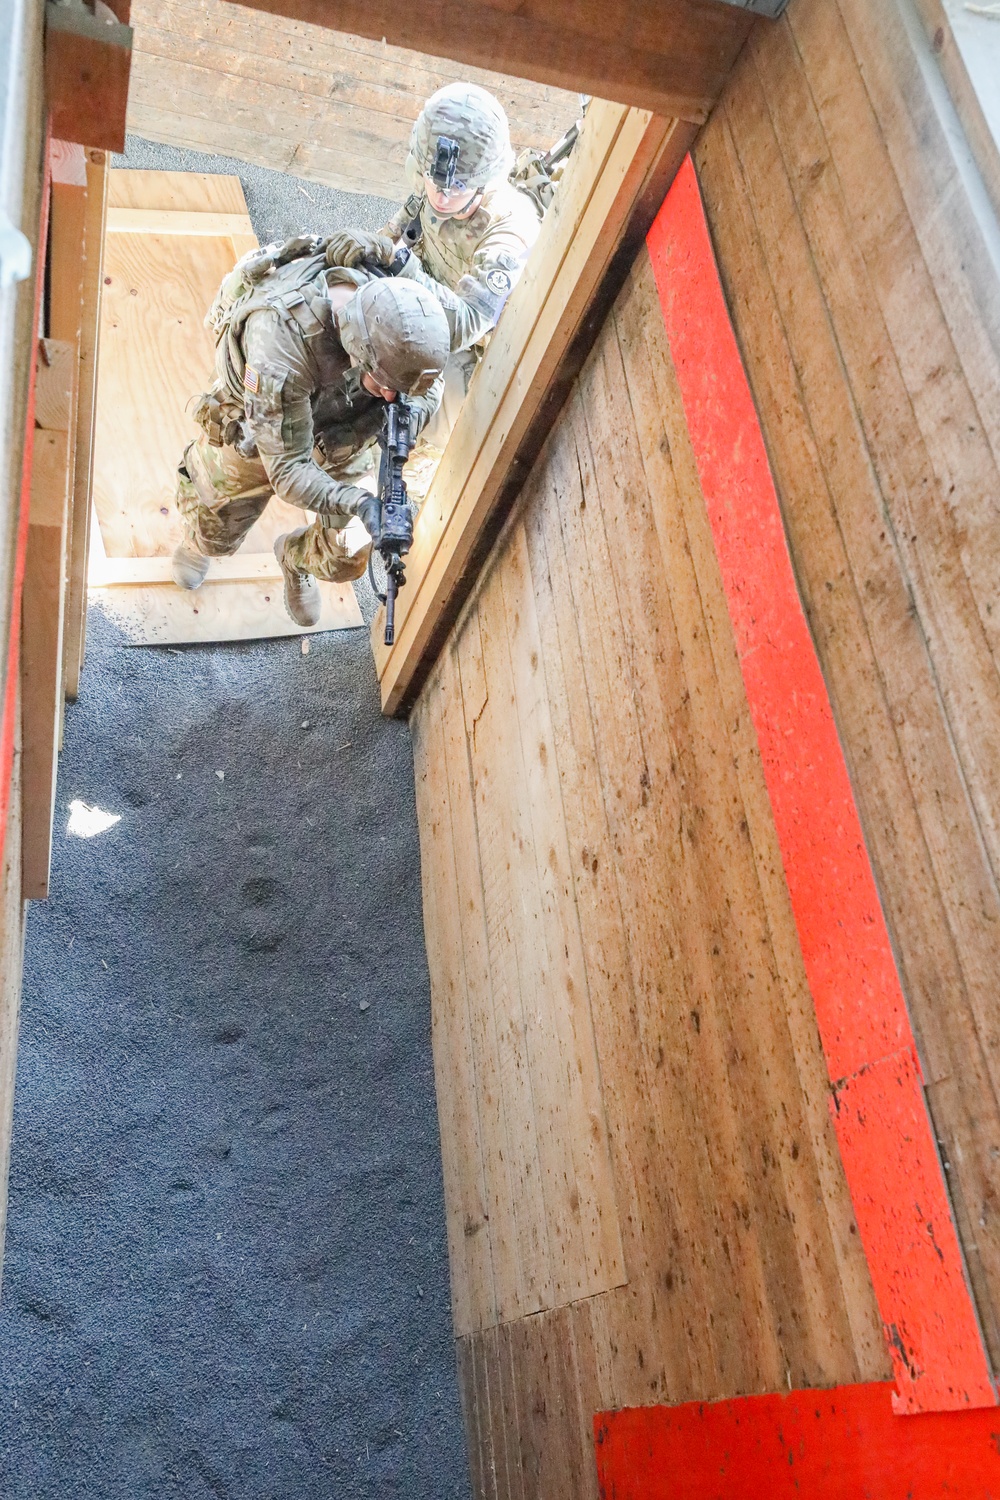 Shoothouse creates realistic training scenario for Soldiers